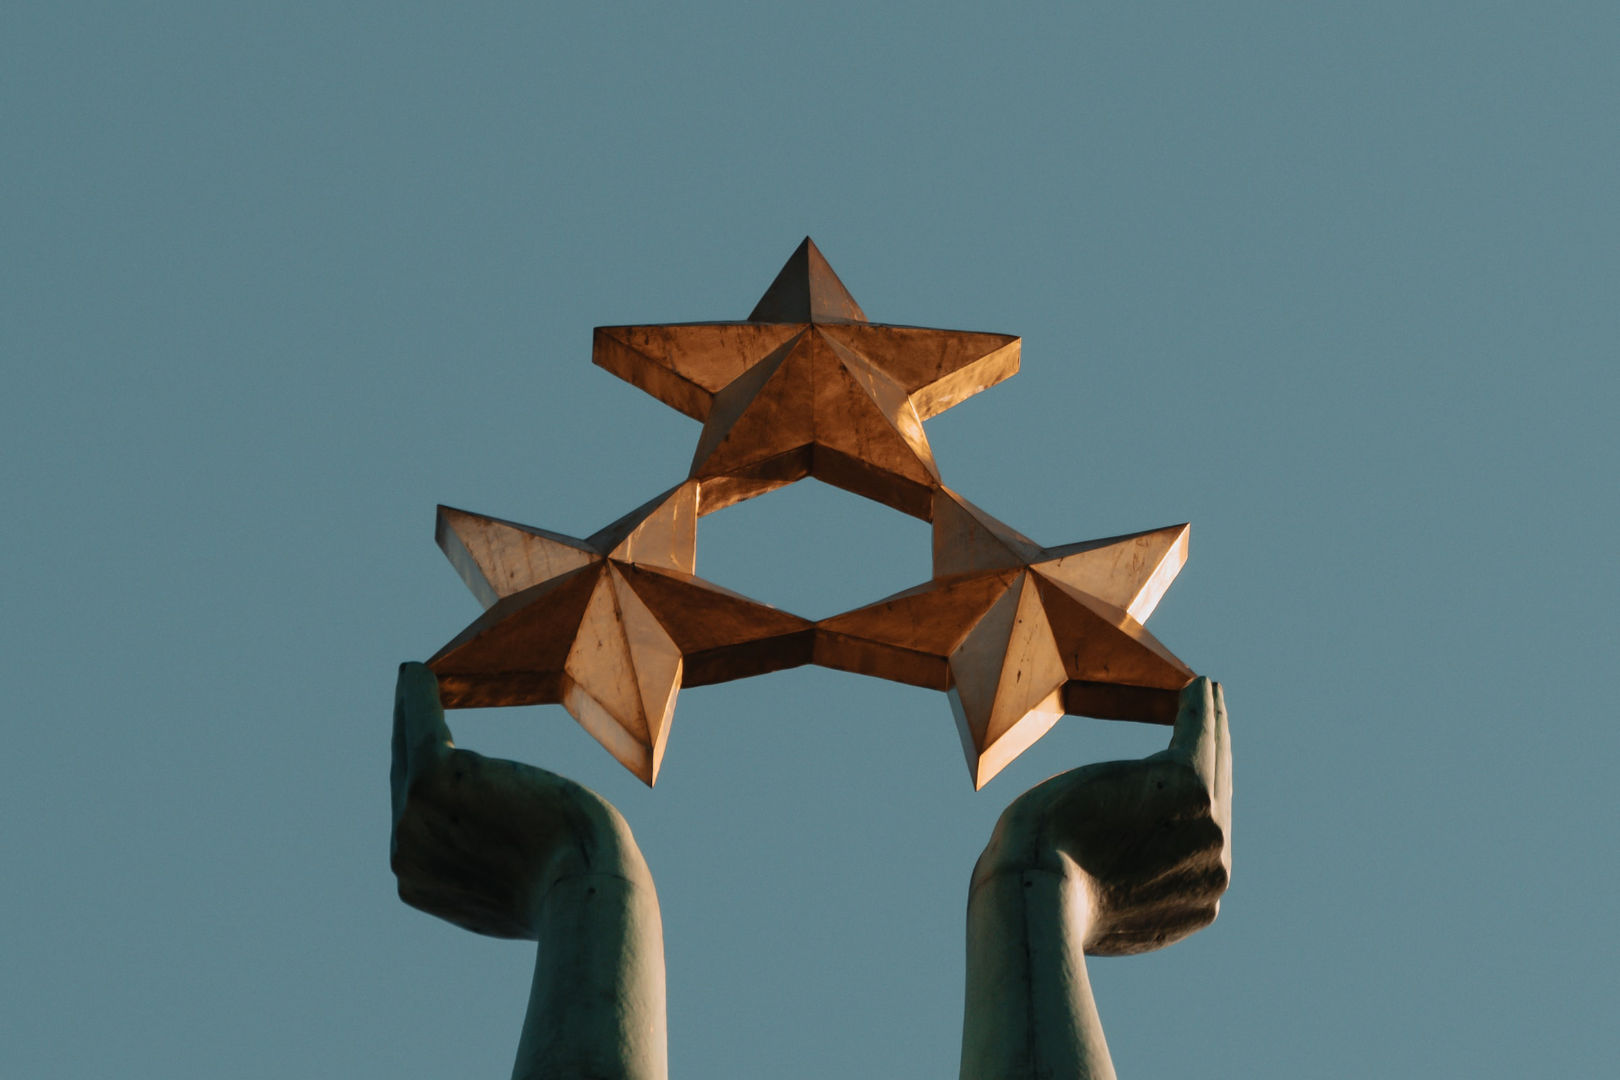 A brown infrastructure showing hands holding up a 3-star design under clear blue sky.